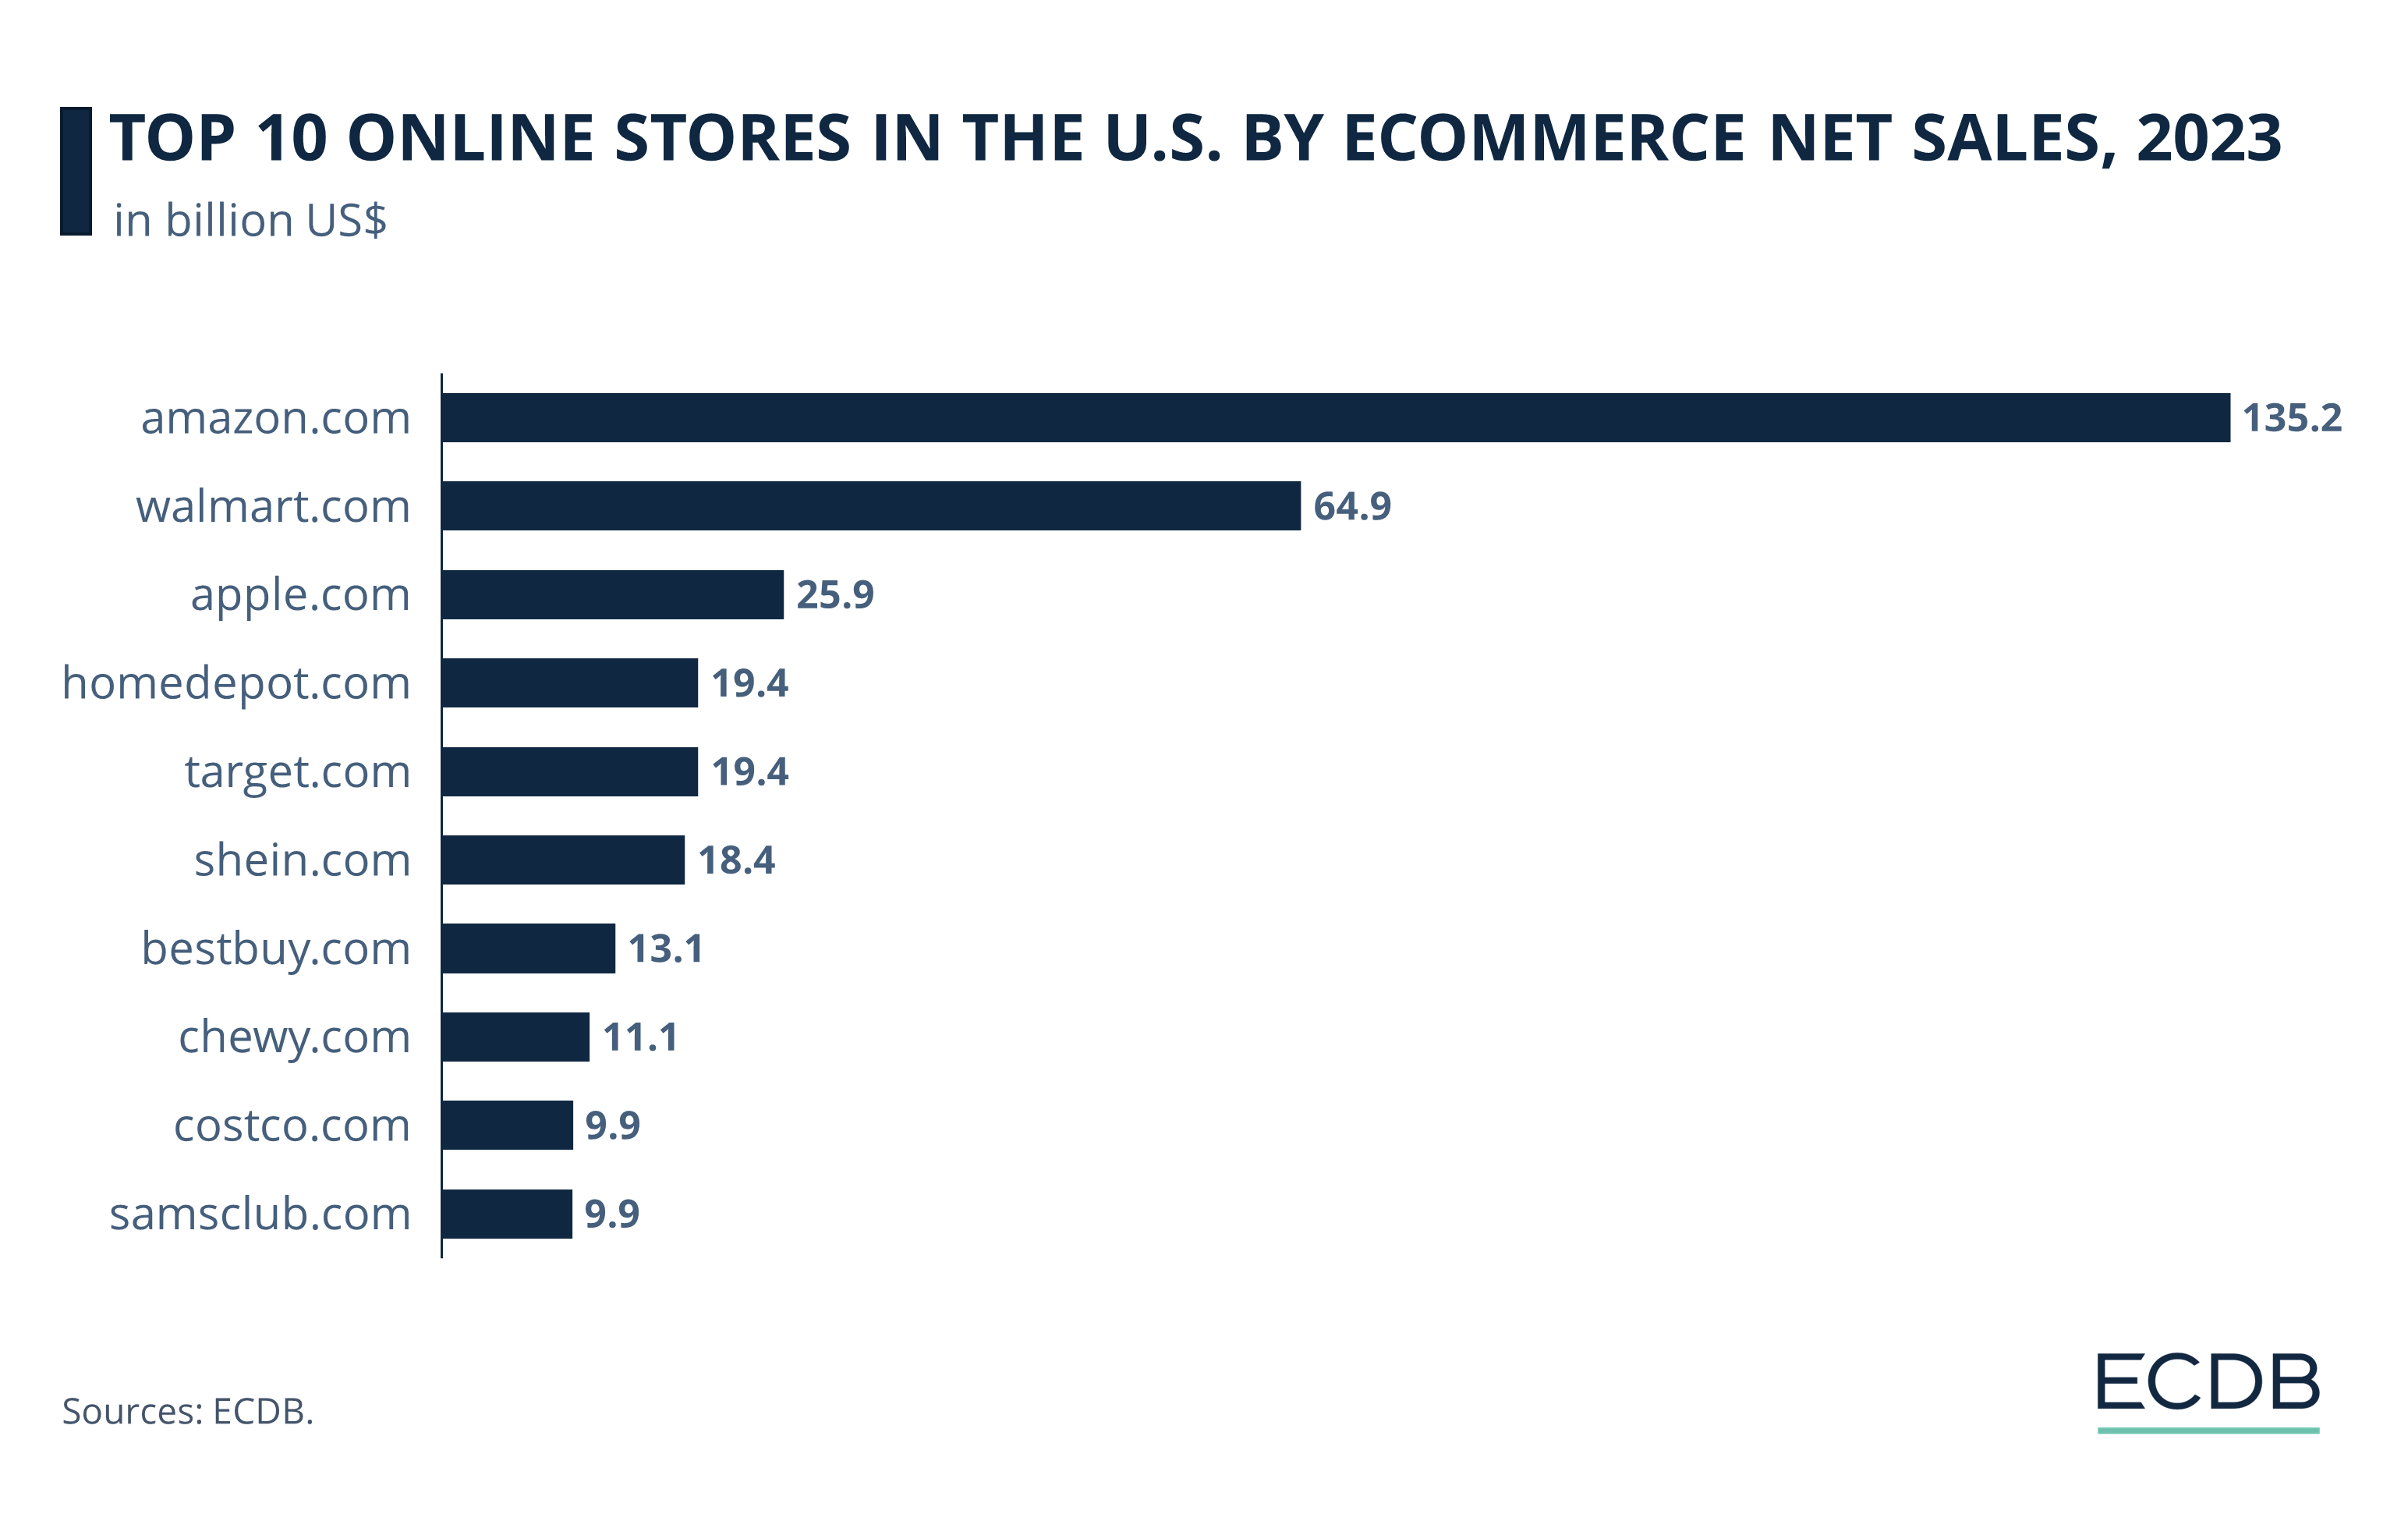 Top 10 Online Stores in the U.S. by eCommerce Net Sales, 2023